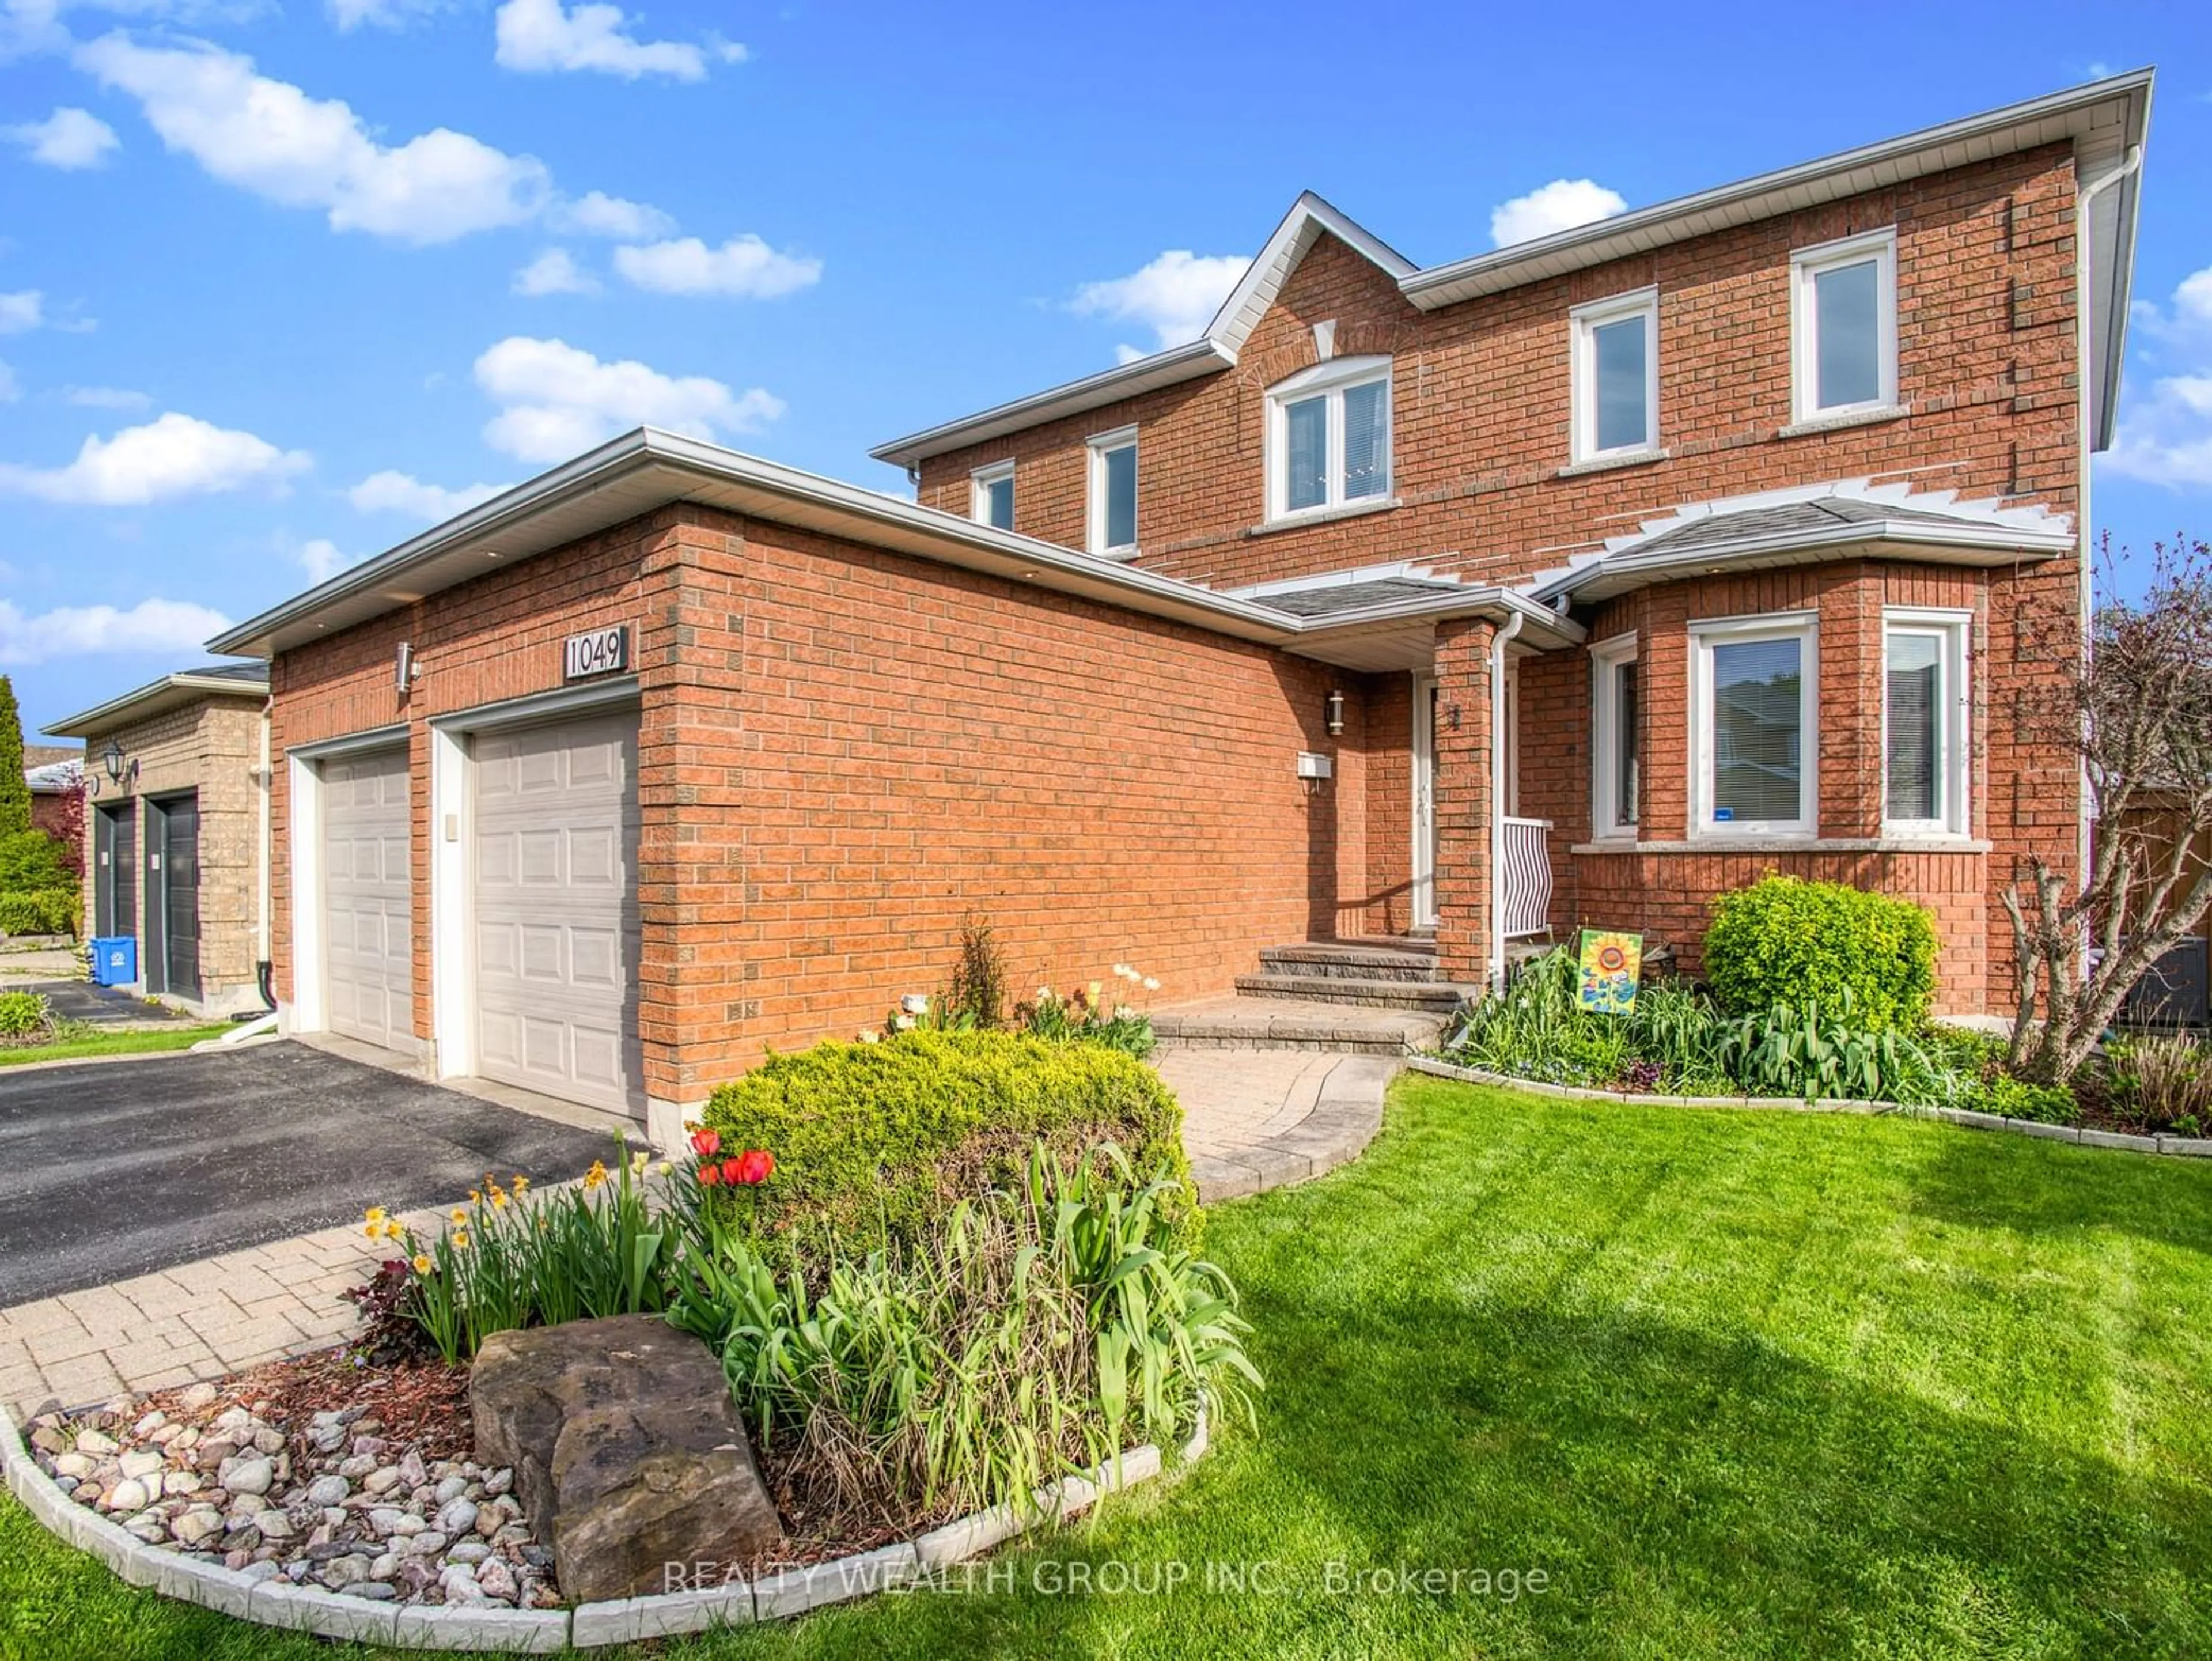 Home with brick exterior material for 1049 Beaver Valley Cres, Oshawa Ontario L1J 8N2